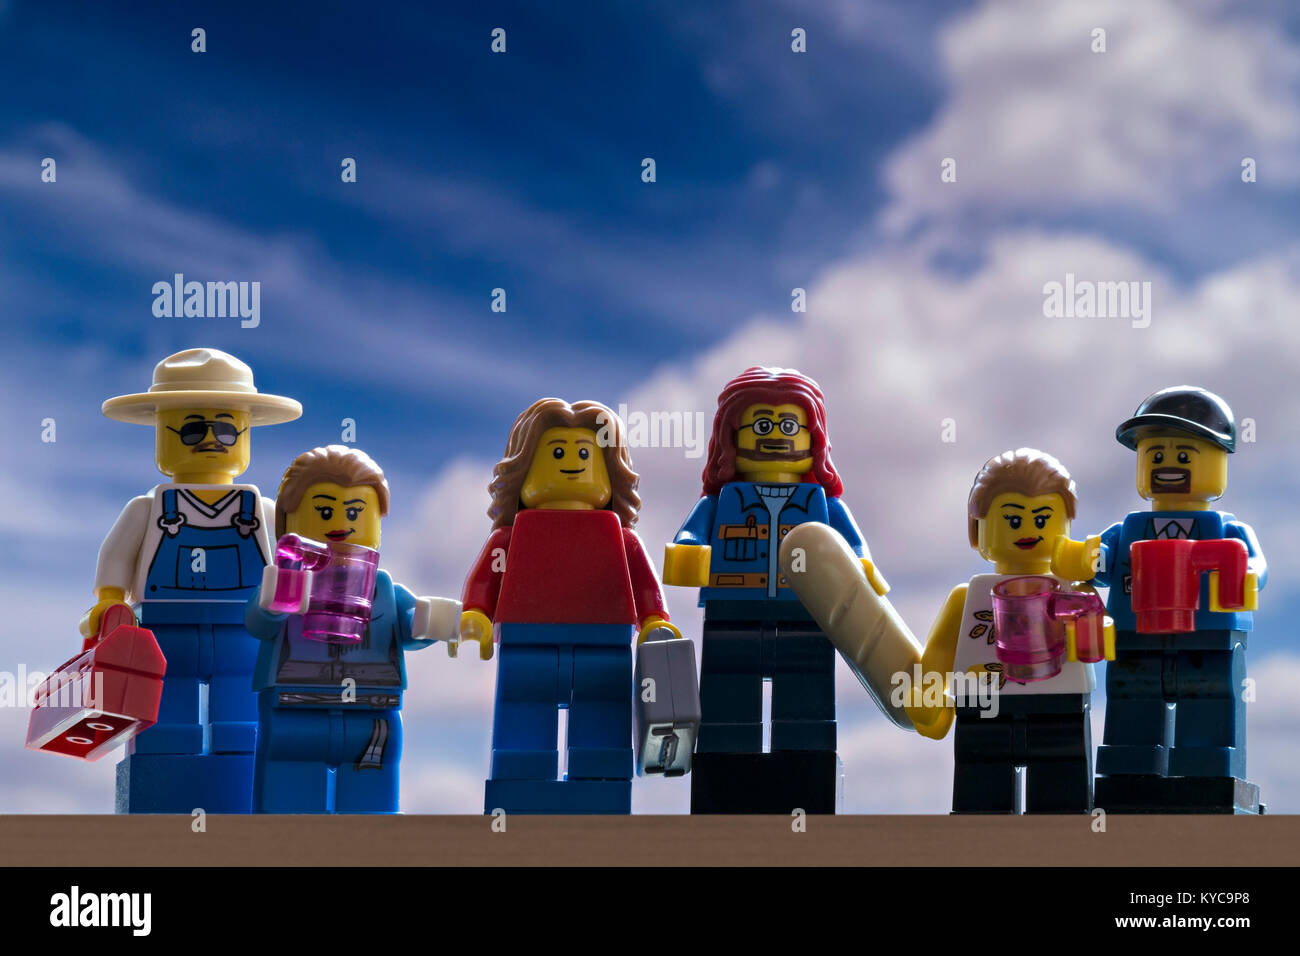 Family of Lego people mini-figures against blue sky background Stock Photo